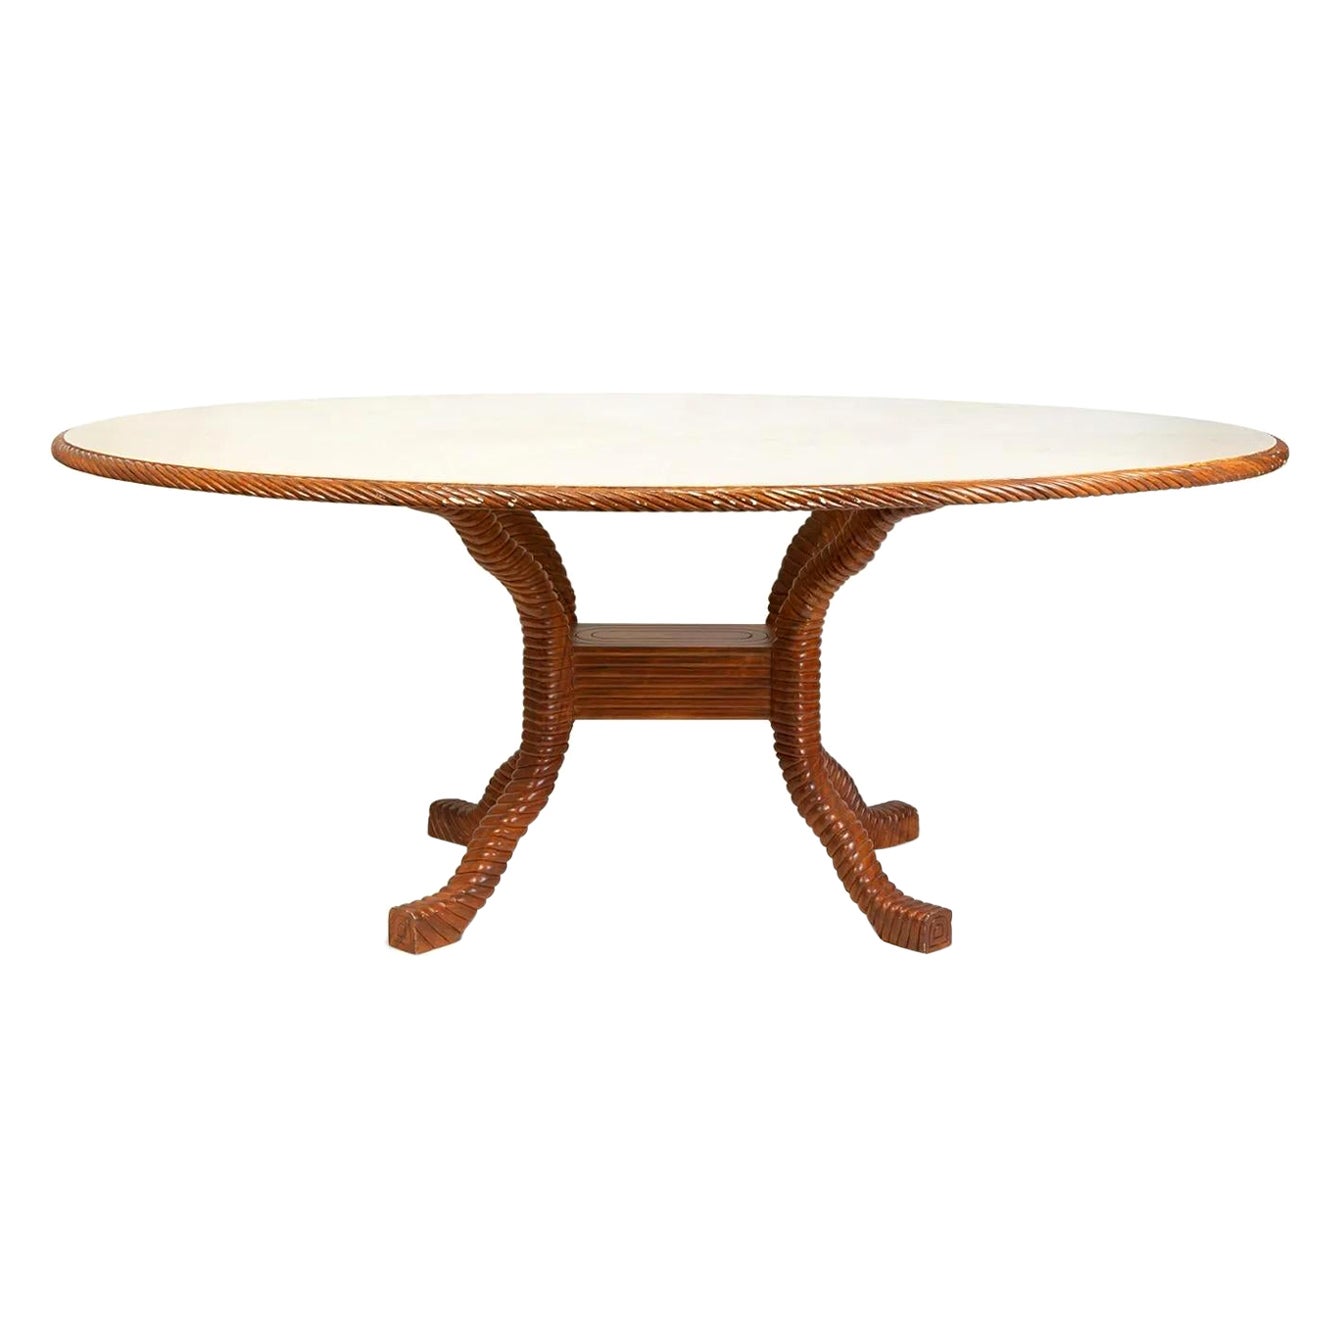 Italian Faux-Painted and Rope Carved Dining Table